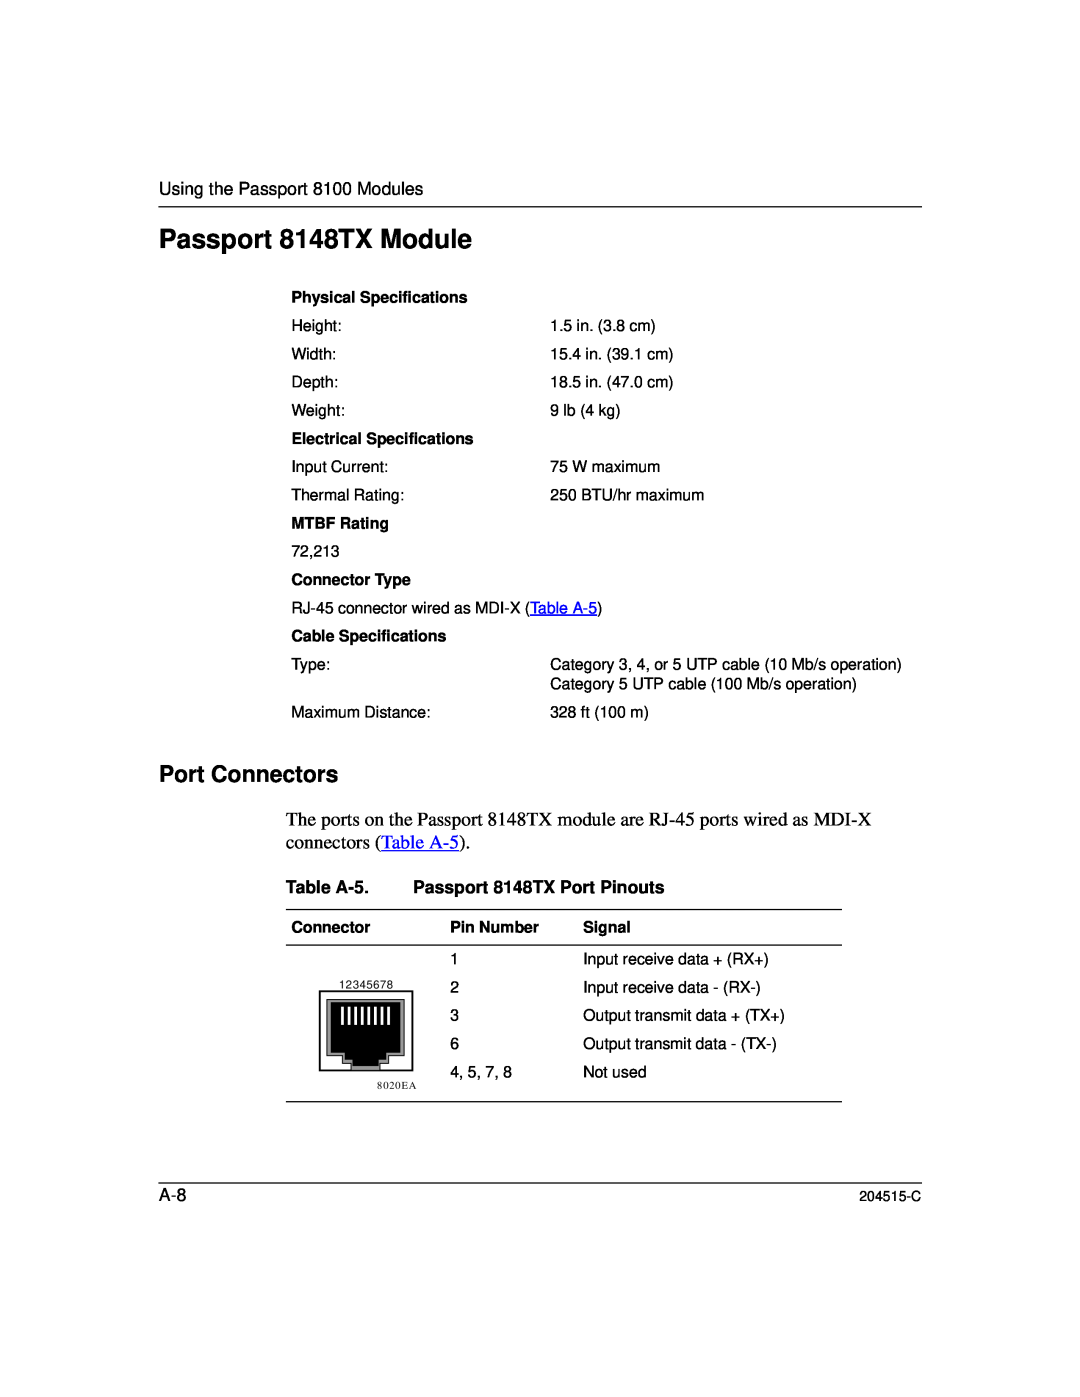 Nortel Networks manual Passport 8148TX Module, Port Connectors, Using the Passport 8100 Modules, Physical Specifications 